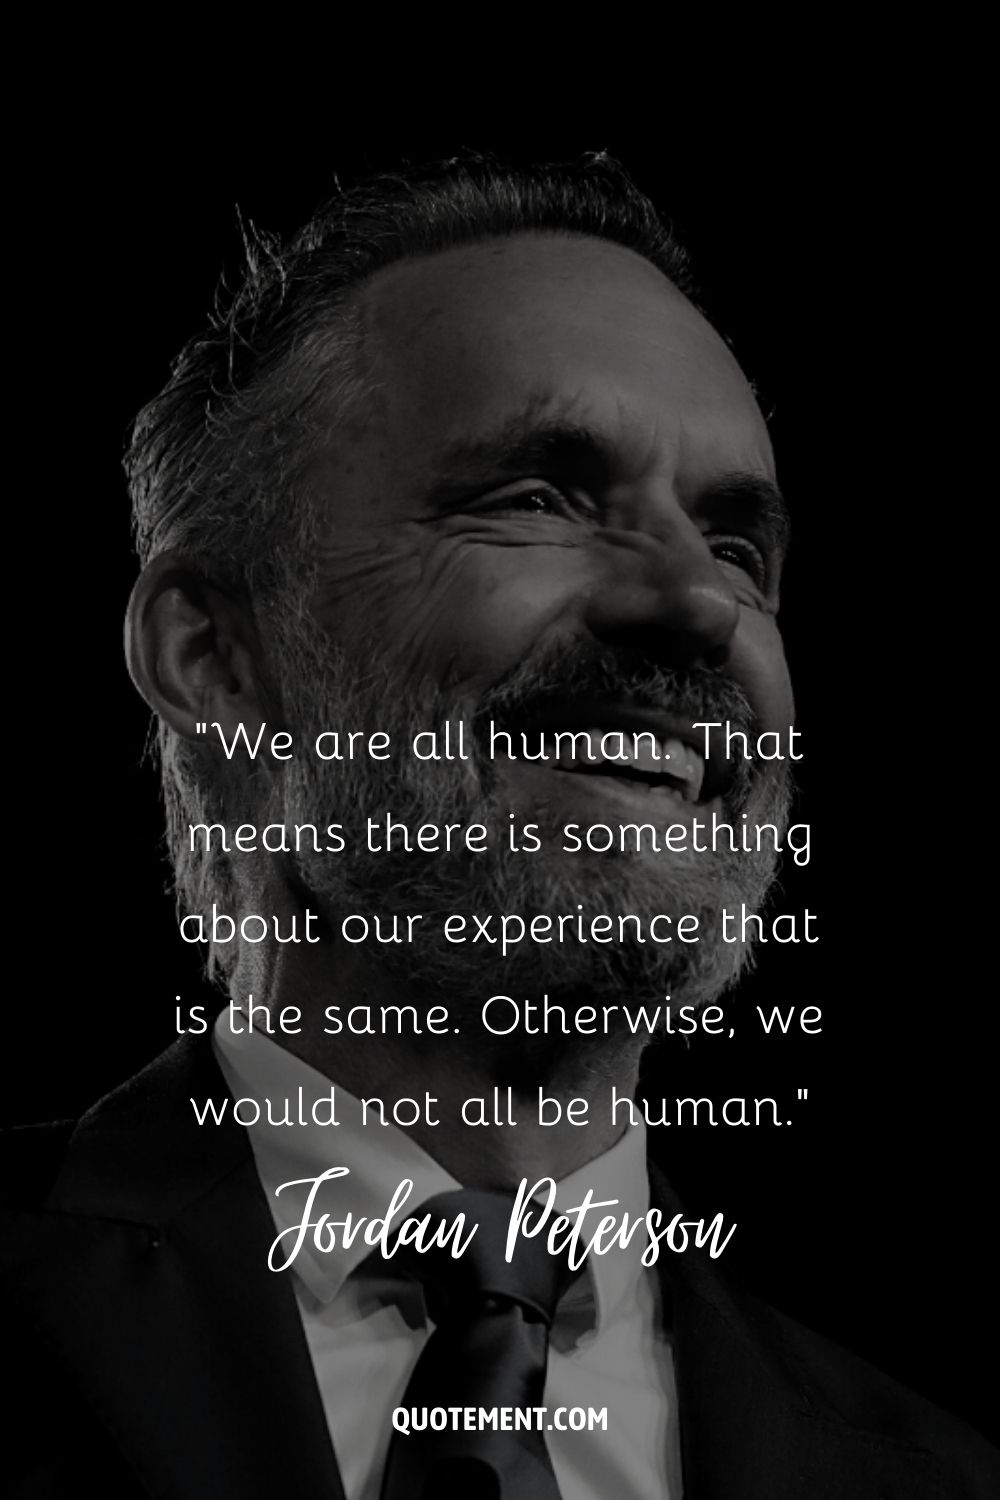 We are all human. That means there is something about our experience that is the same. Otherwise, we would not all be human